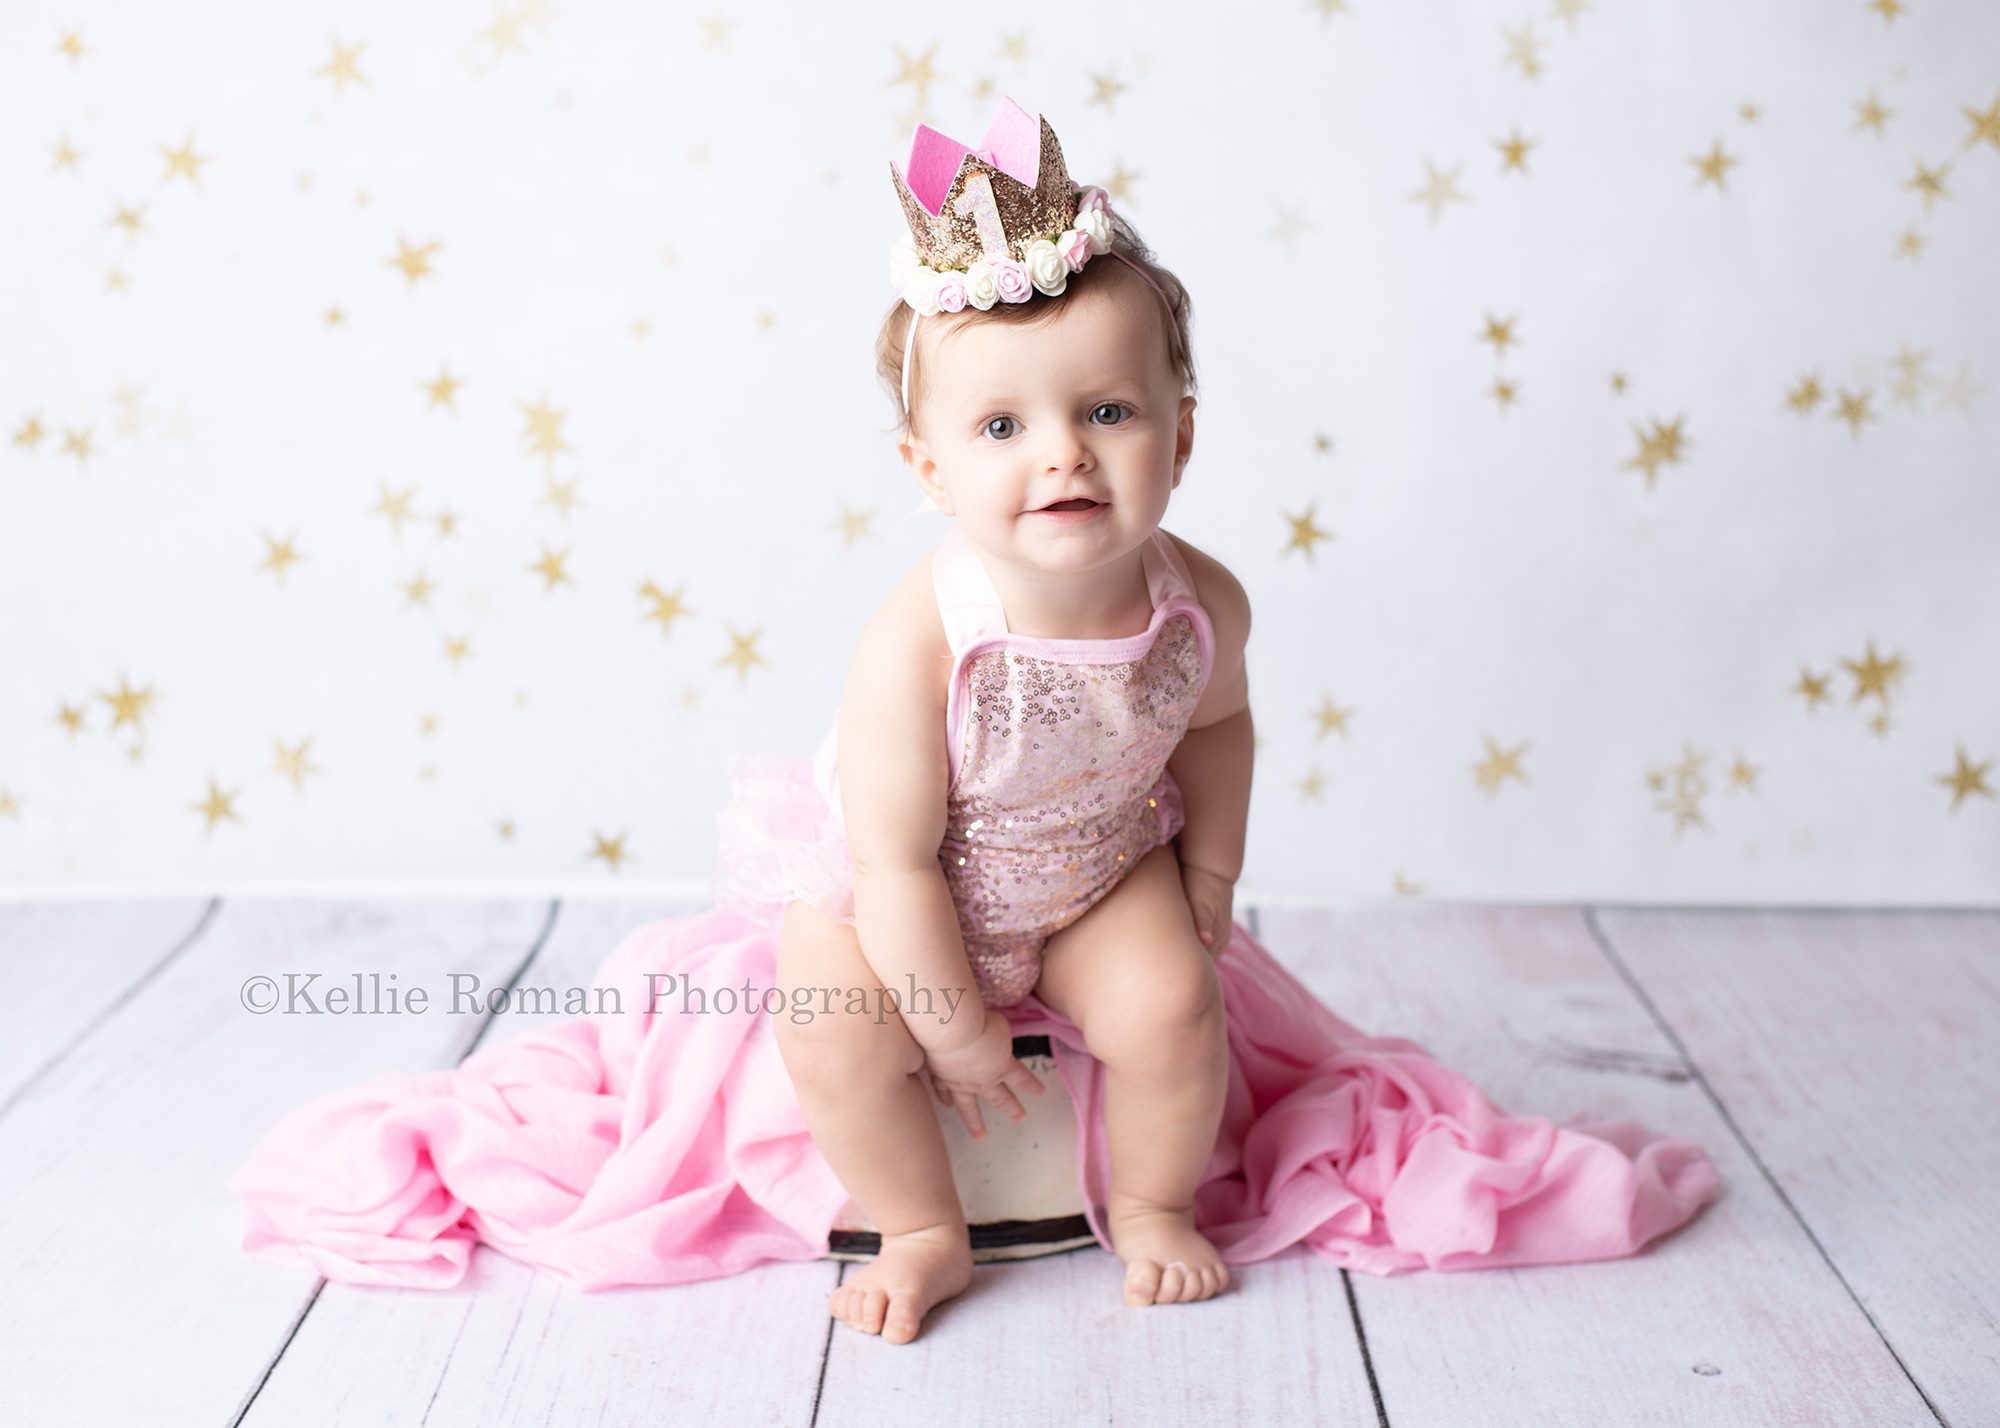 girlie cake smash a one year old girl is in a milwaukee photographers s studio she is sitting on a white wood tub with a pink fabric over it. She has a pink romper on with gold sequins and a gold crown hat. she's smiling at the camera. The floor is white wood and the backdrop is white with gold stars.